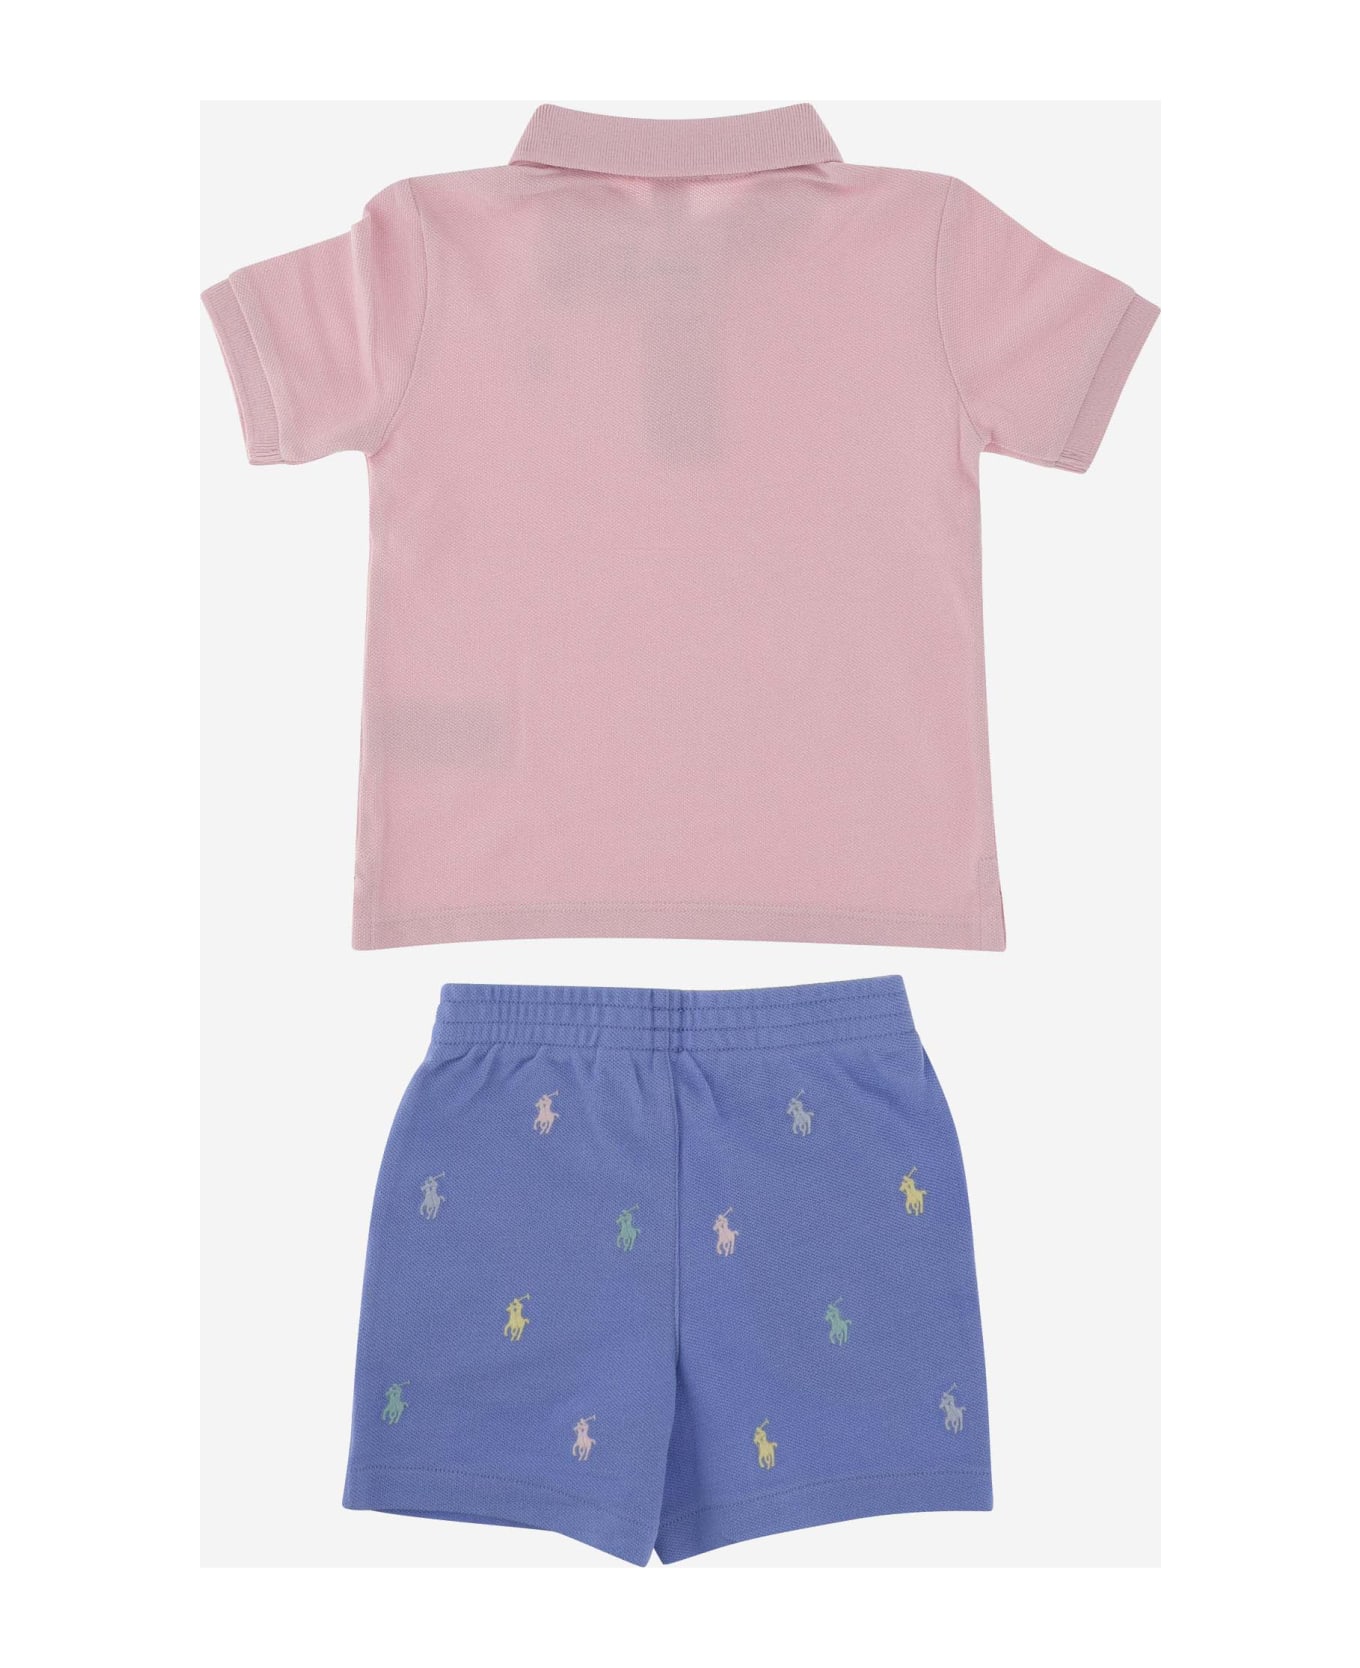 Polo Ralph Lauren Two-piece Outfit Set - Red